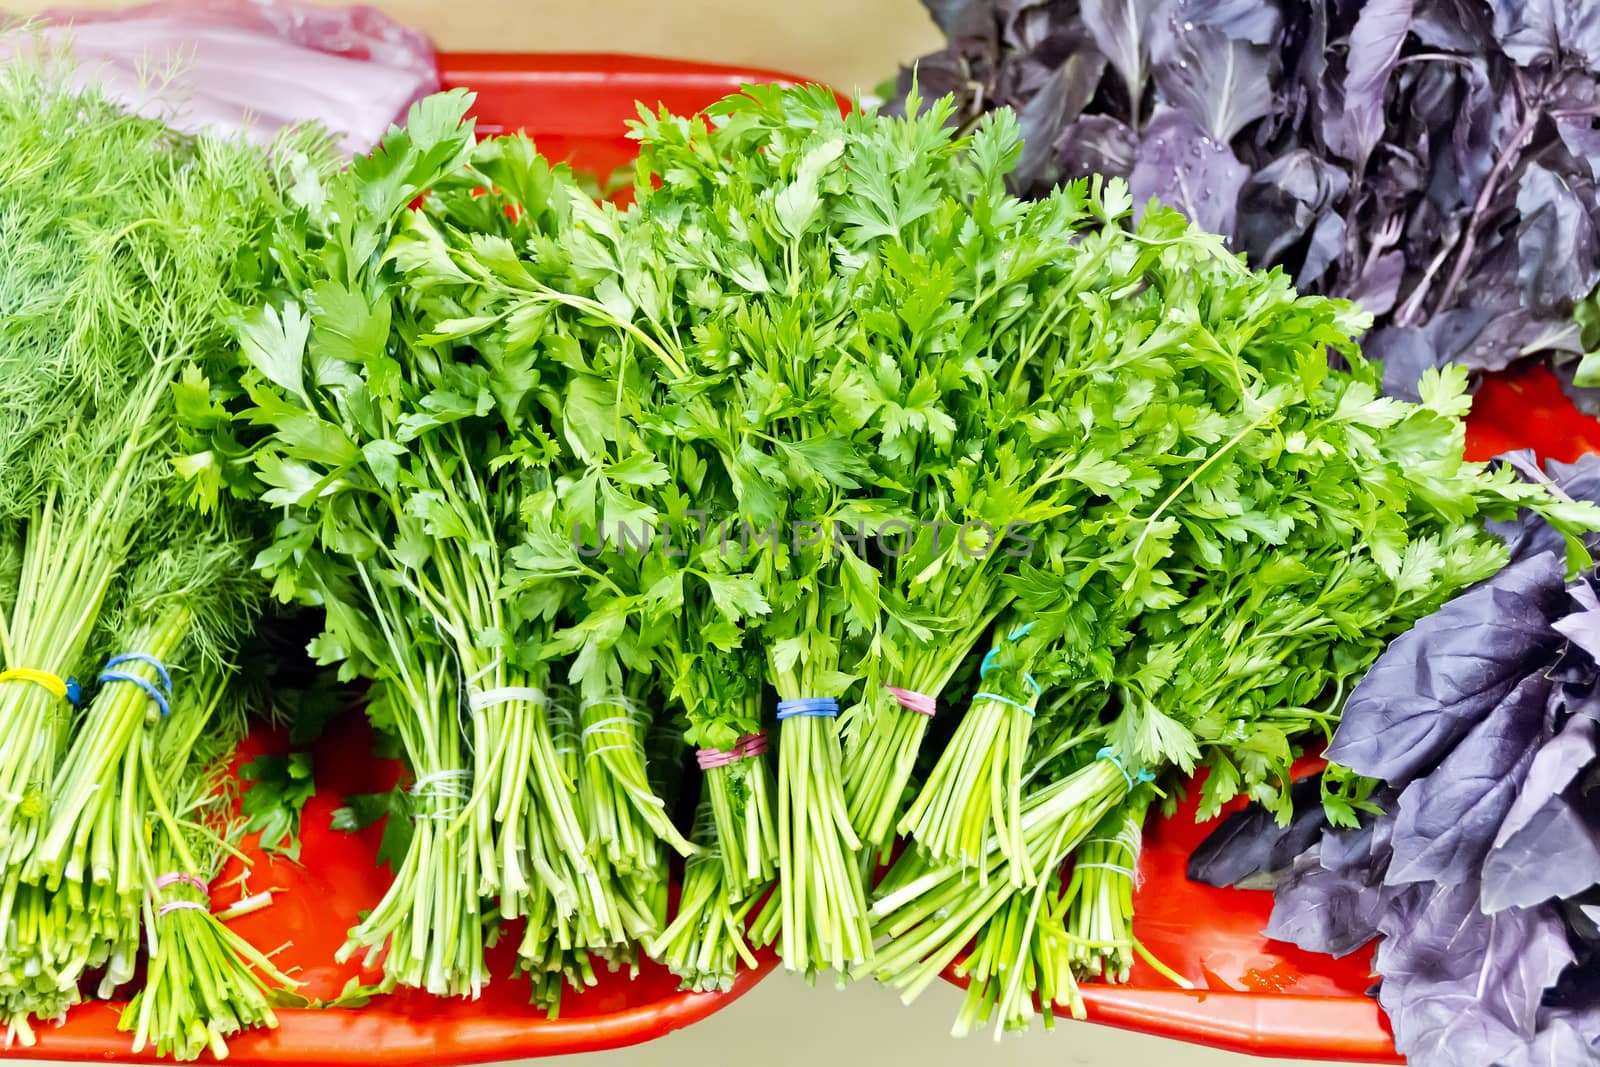 Sheaf of fresh green parsley and dill foliage in marketplace